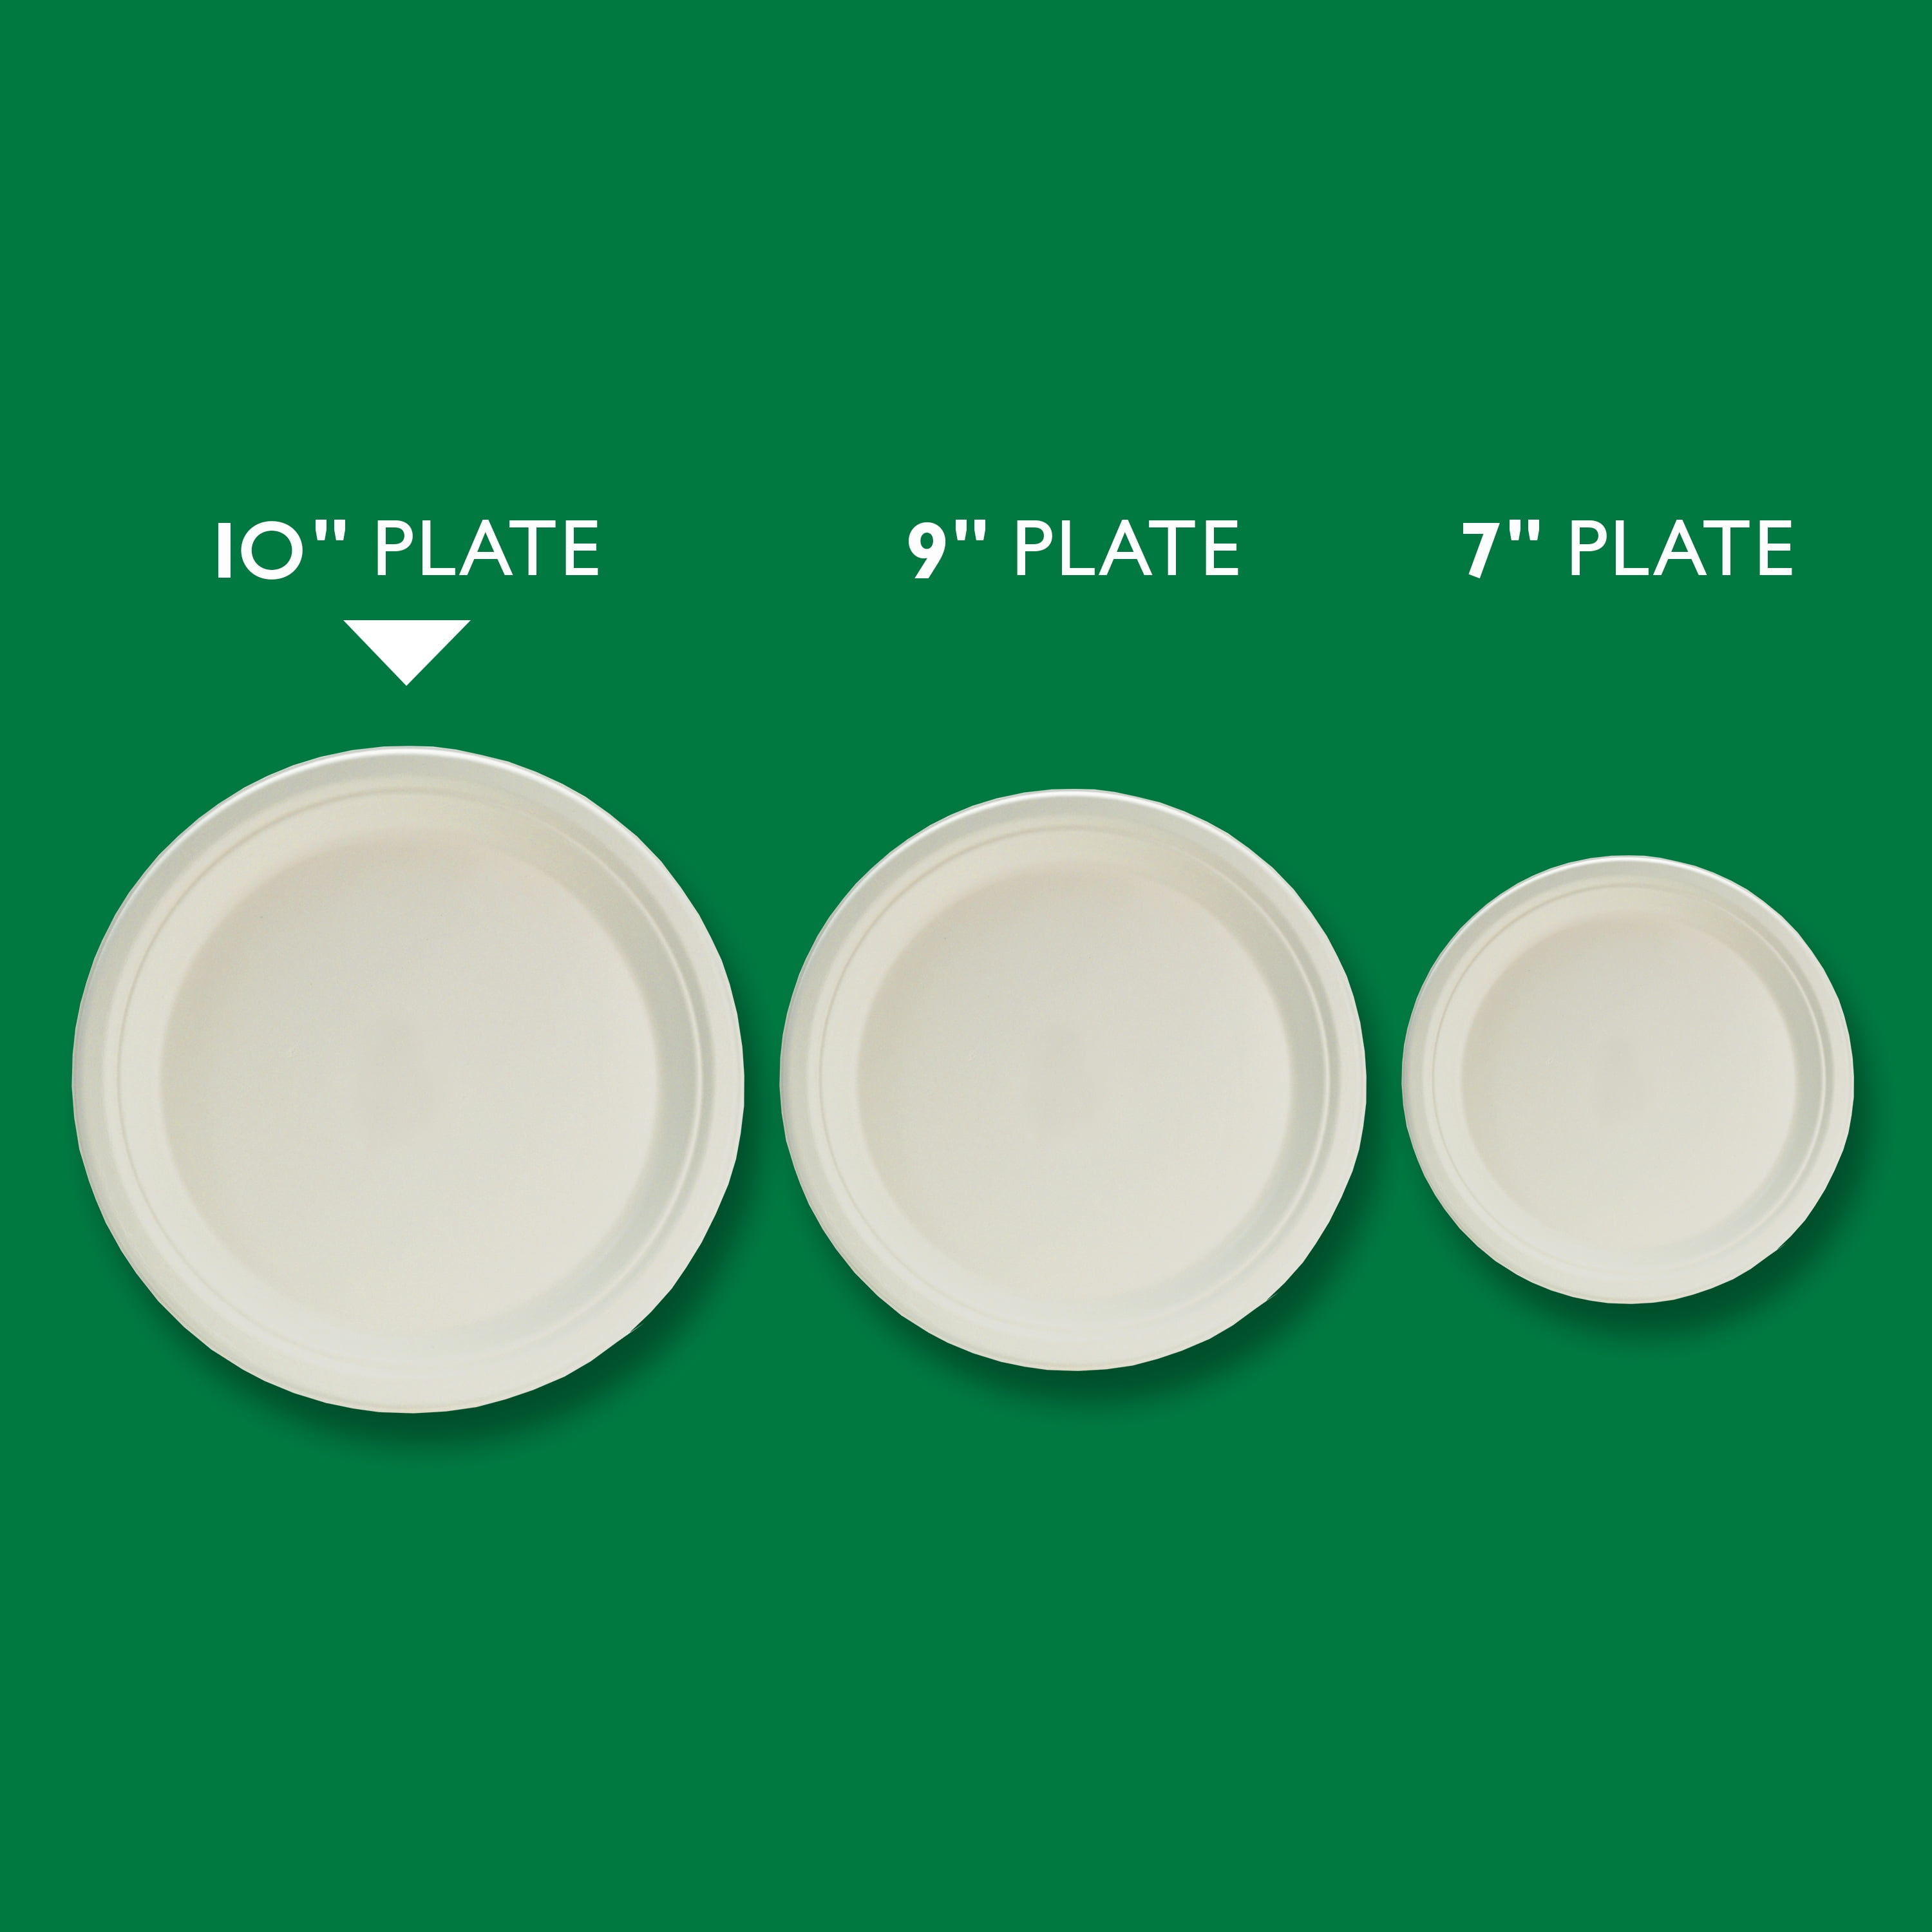  Hefty EcoSave Disposable Plates, Made from Plant Based